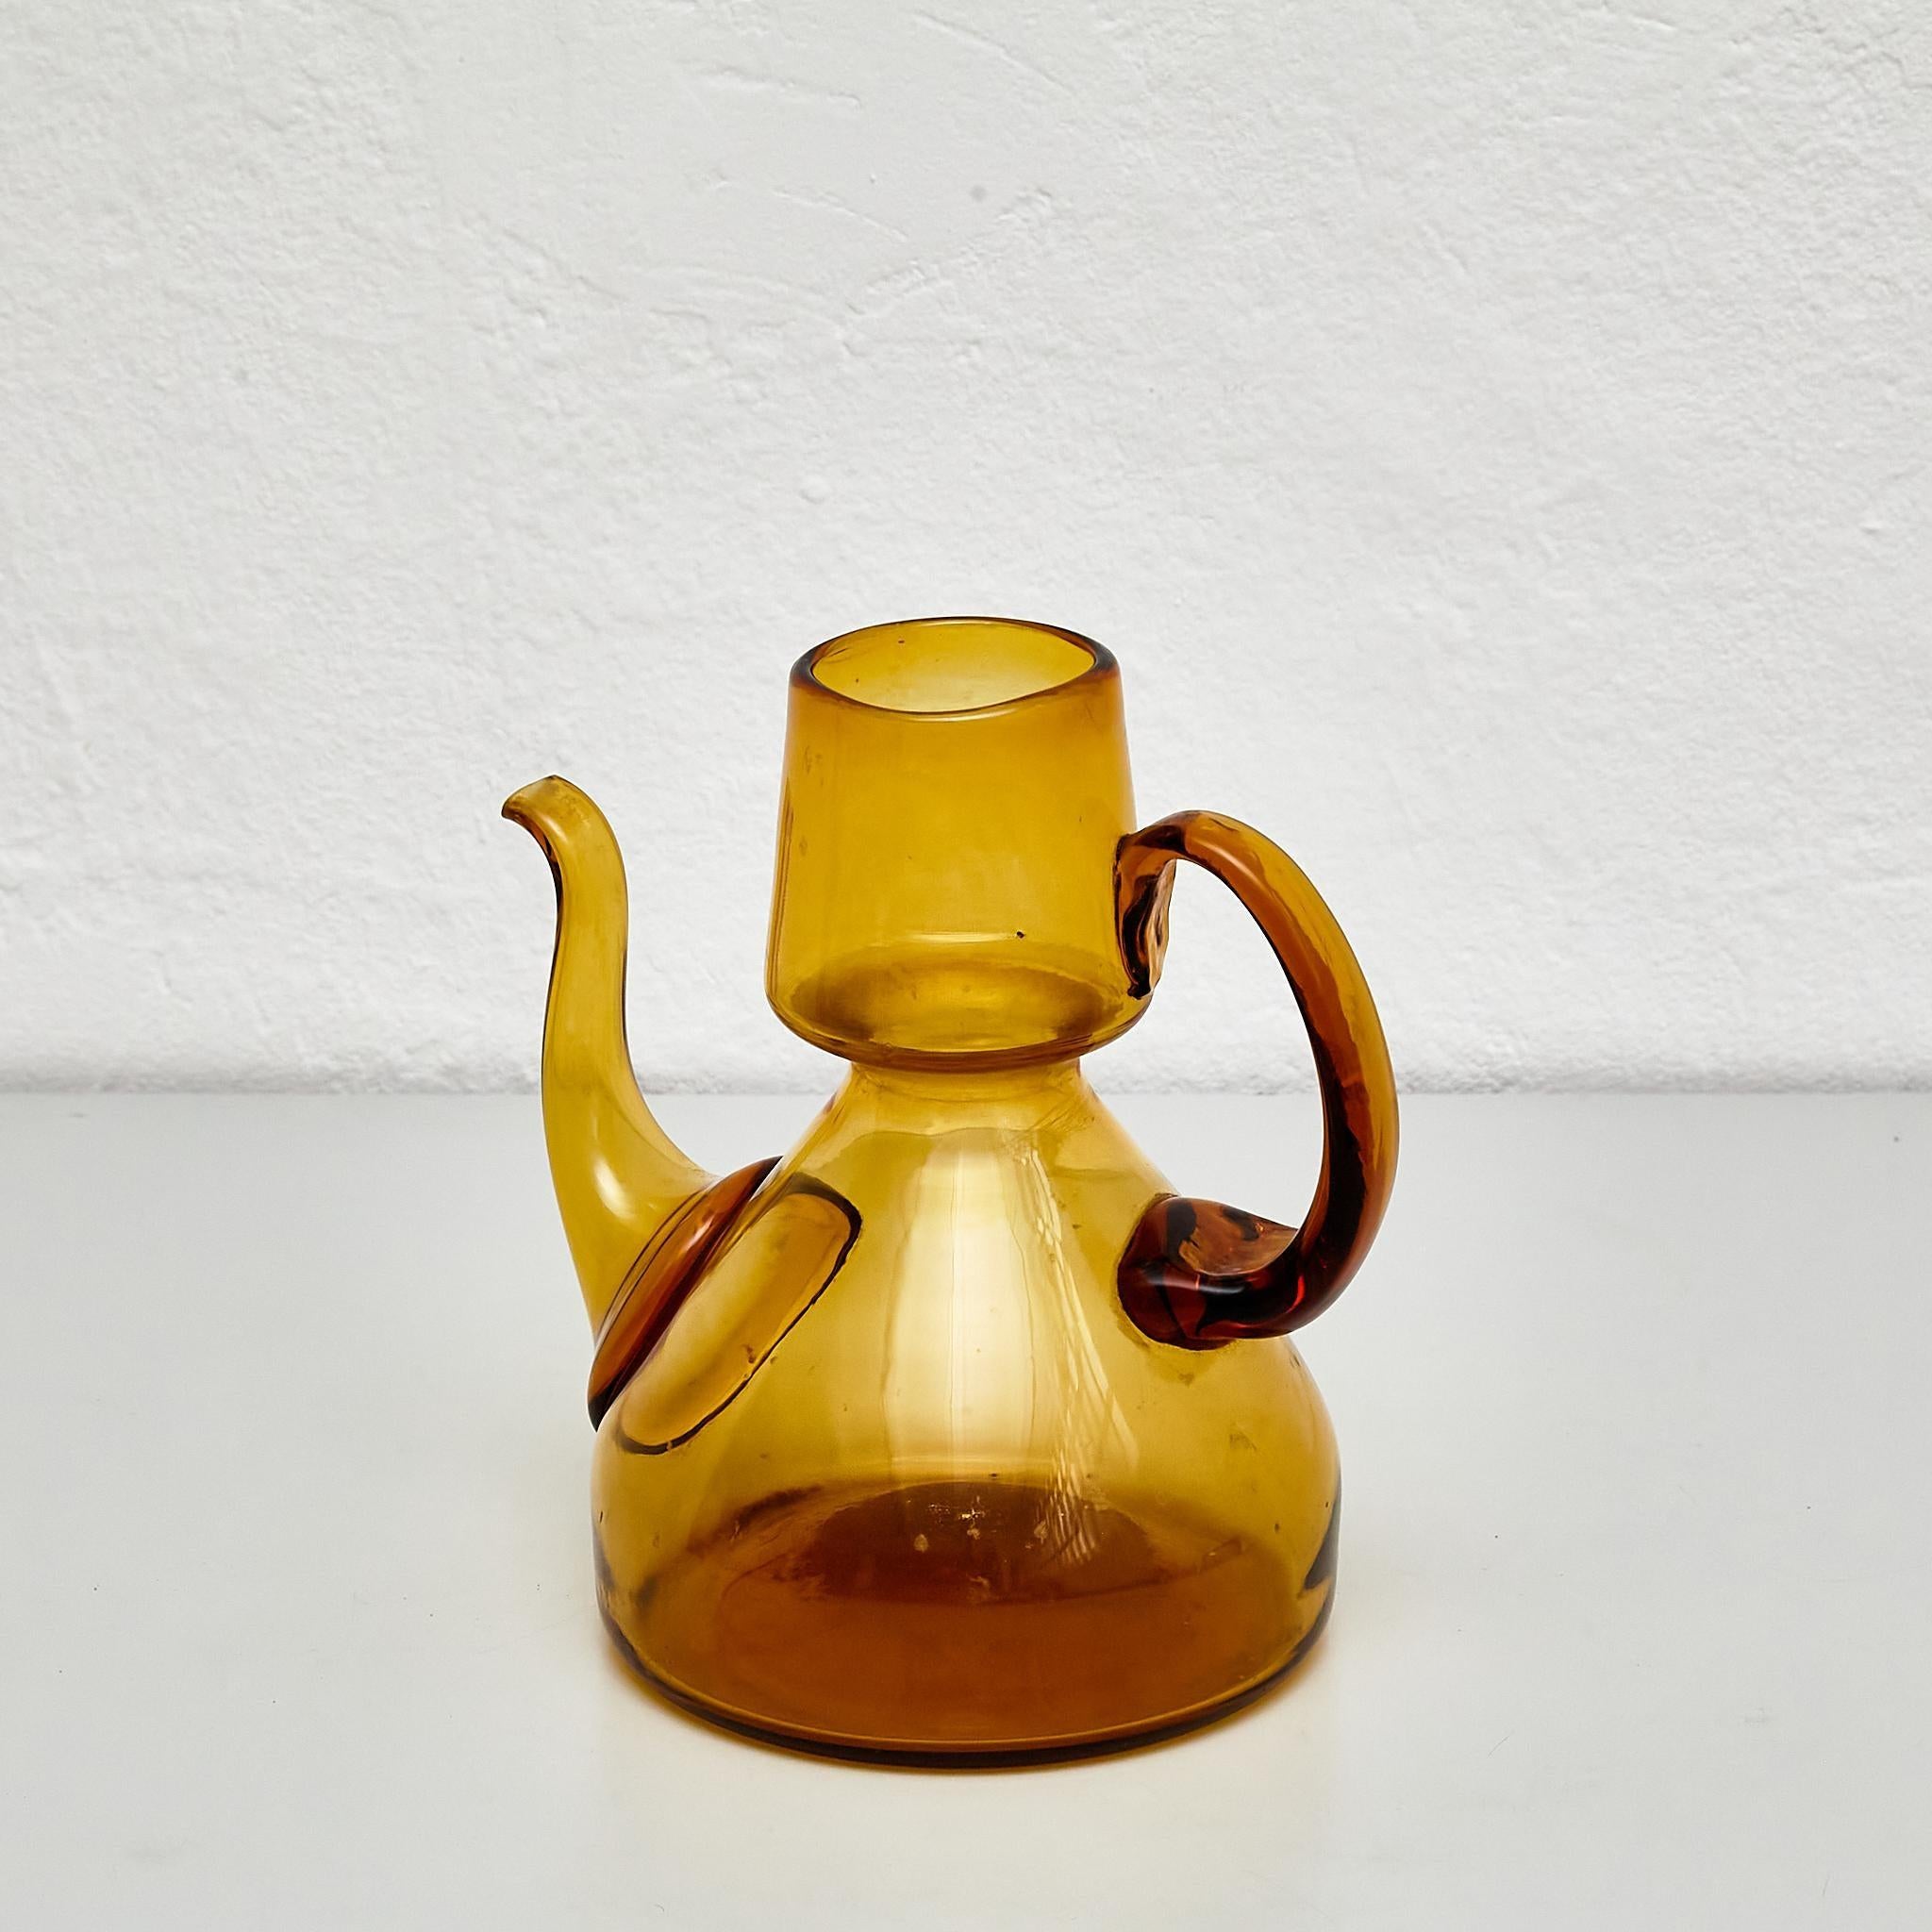 Immerse yourself in nostalgia with this beautiful amber blown glass oil cruet dating back to around 1940. This charming piece is a testament to mid-20th-century craftsmanship, evoking the warmth of a bygone era.

The subtlety of the amber blown